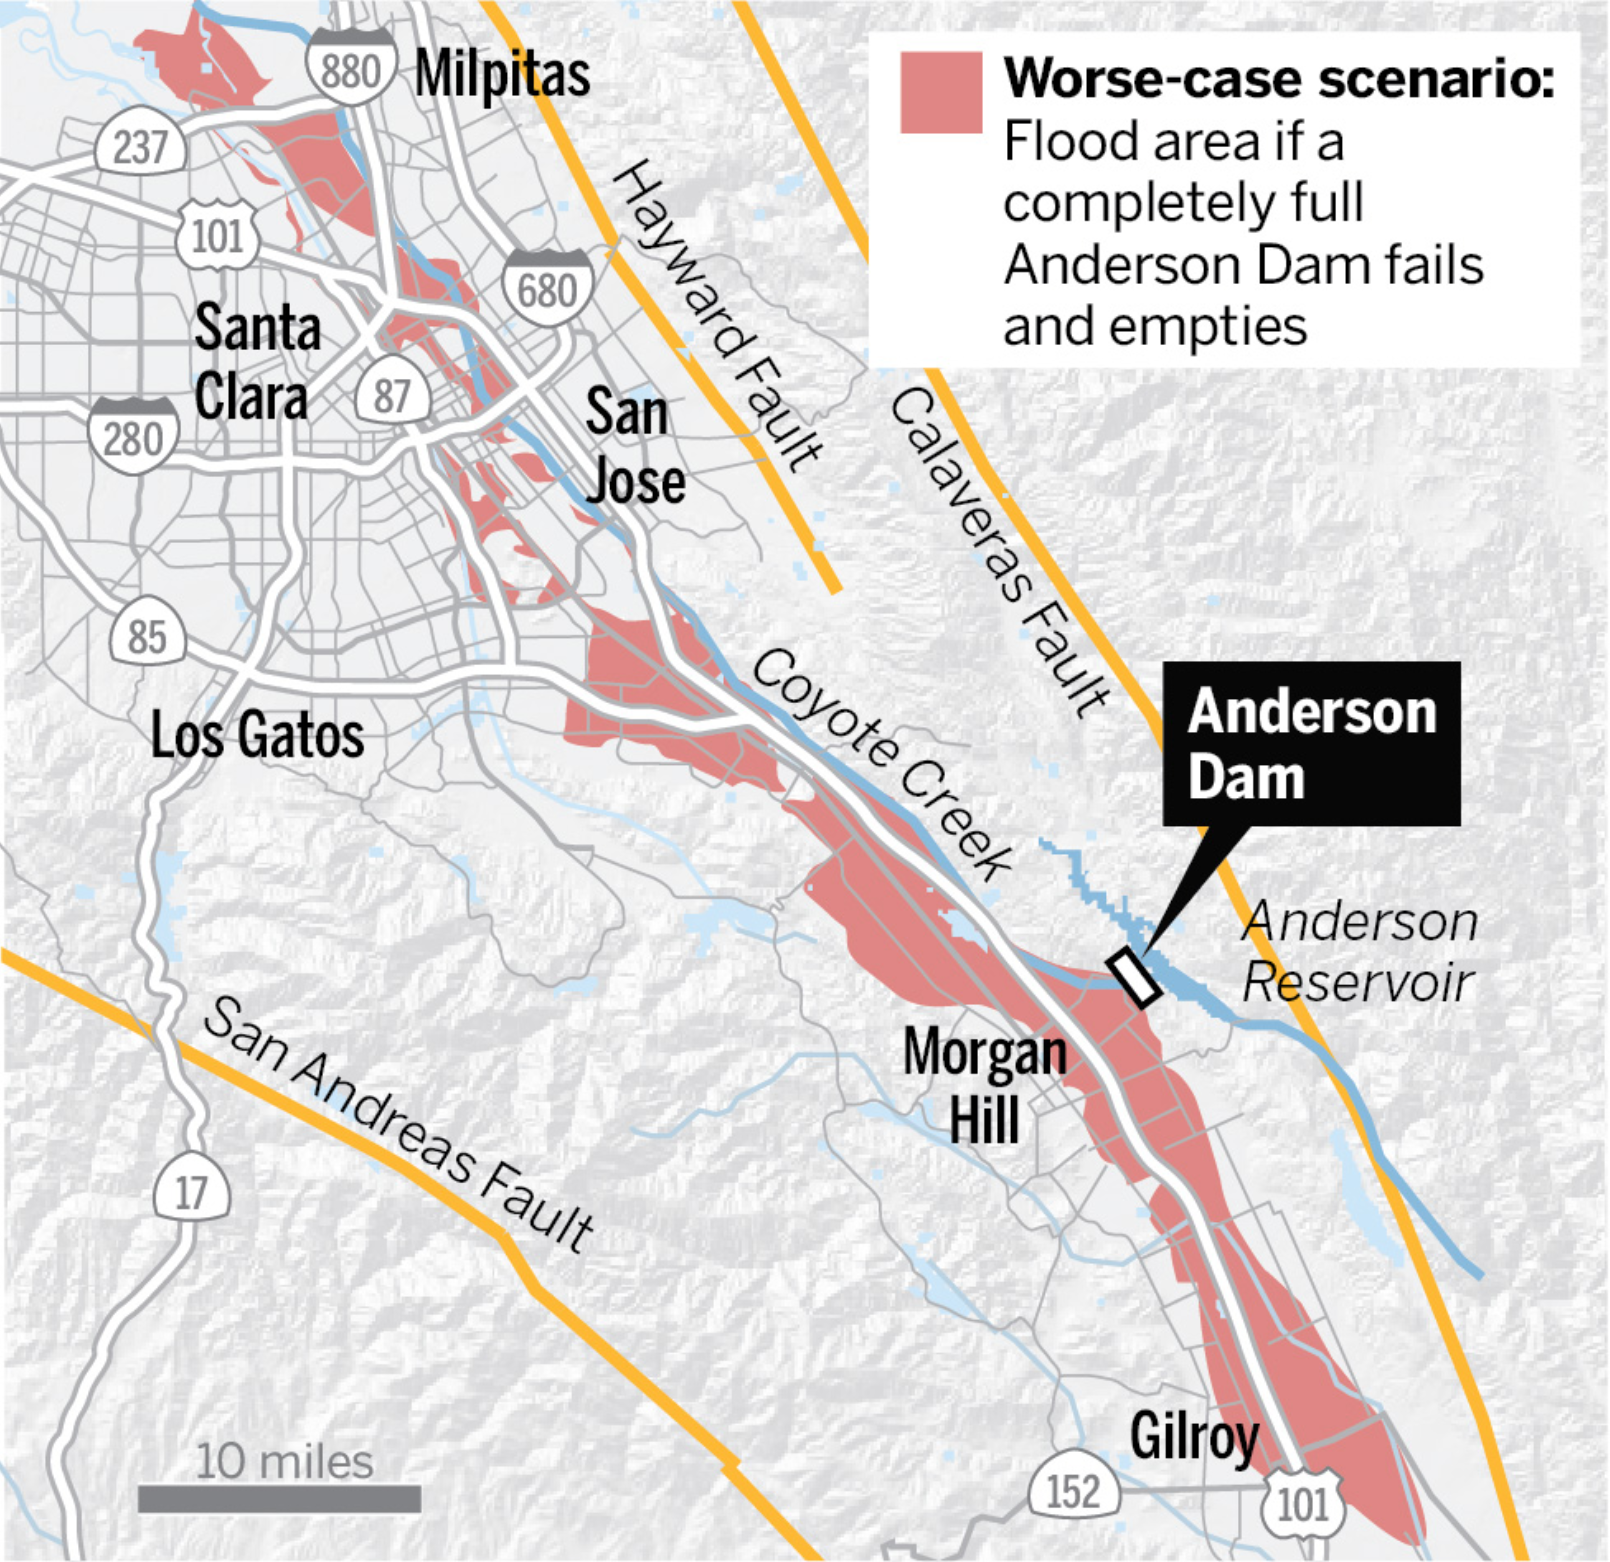 The Bay Area News Group made a helpful map showing which areas would have needed to be evacuated if the Anderson Dam had started failing.